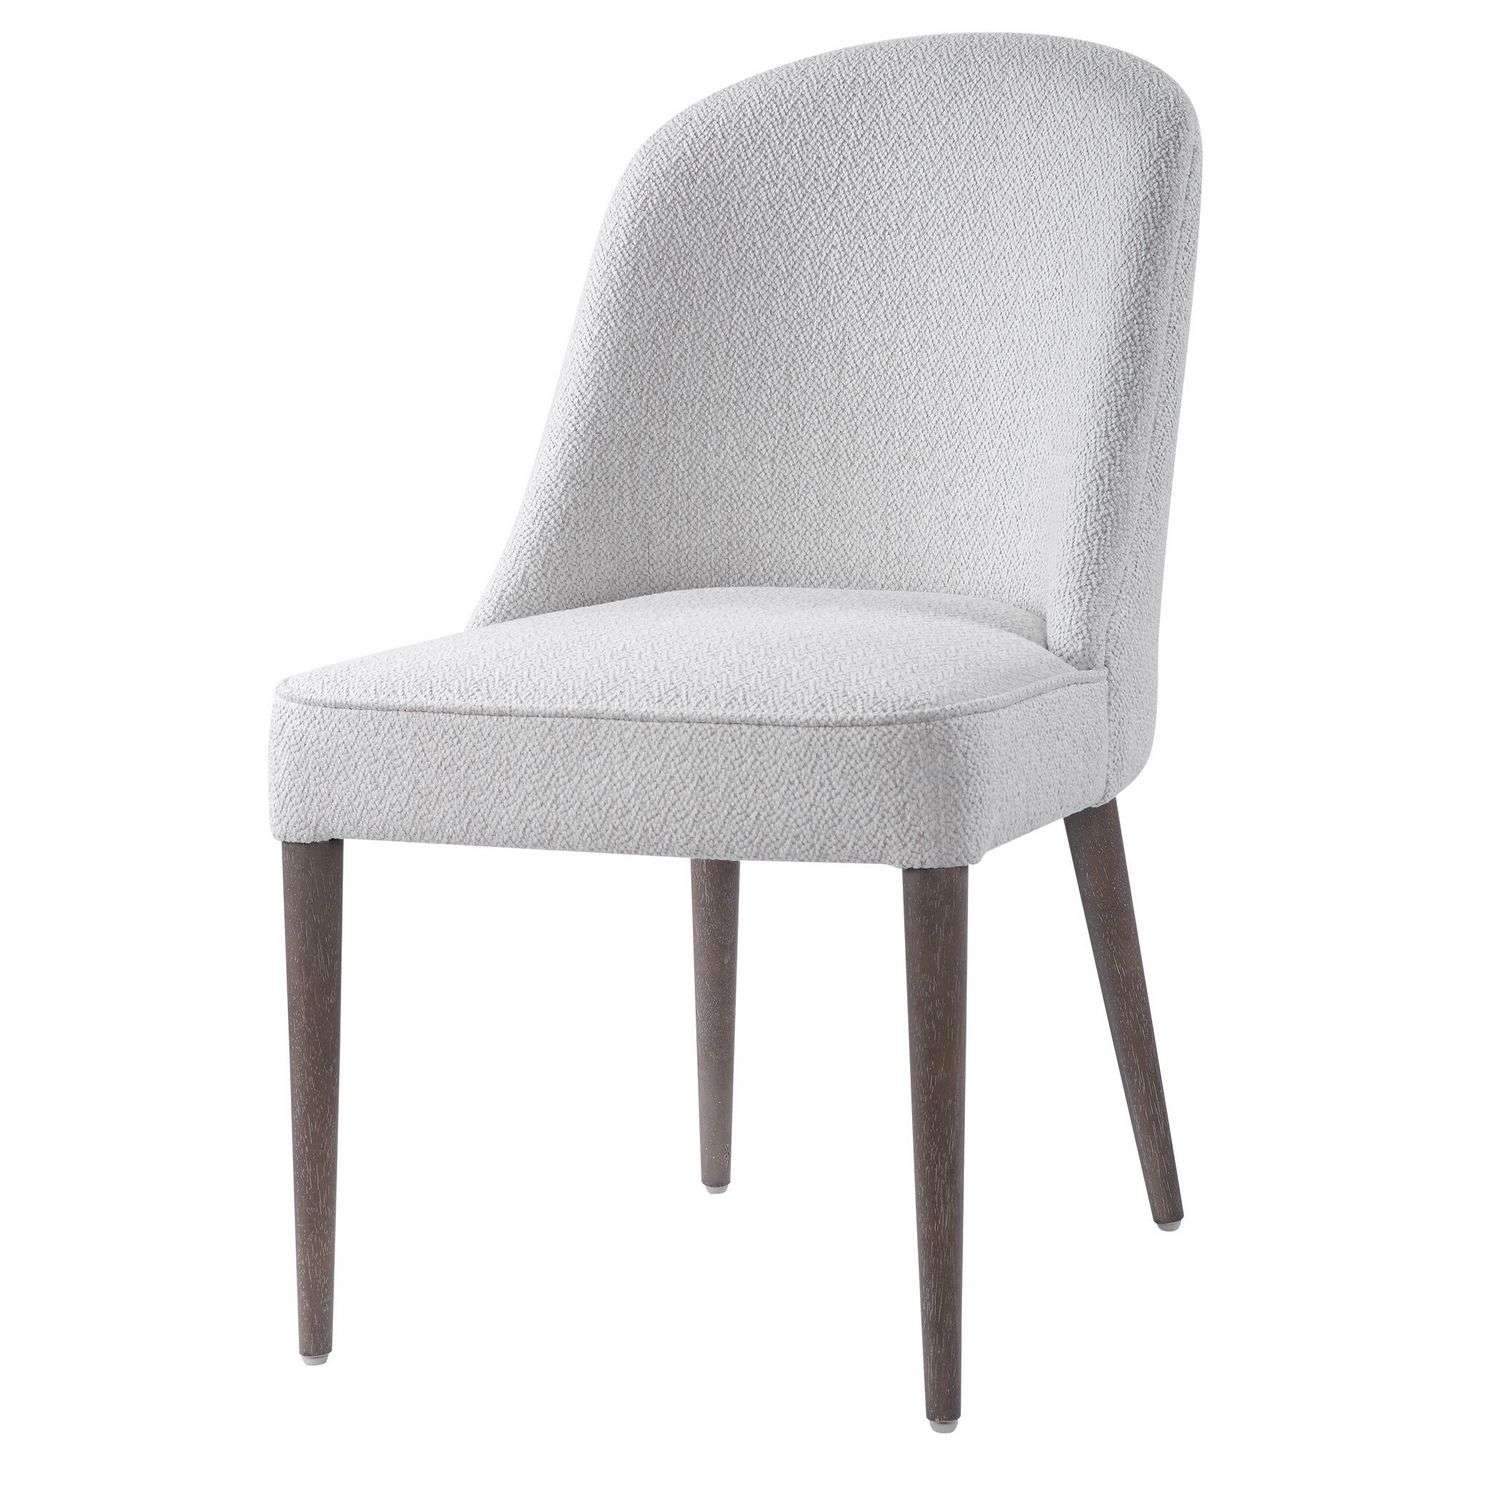 Uttermost Brie Armless Chair - Set of 2 - White